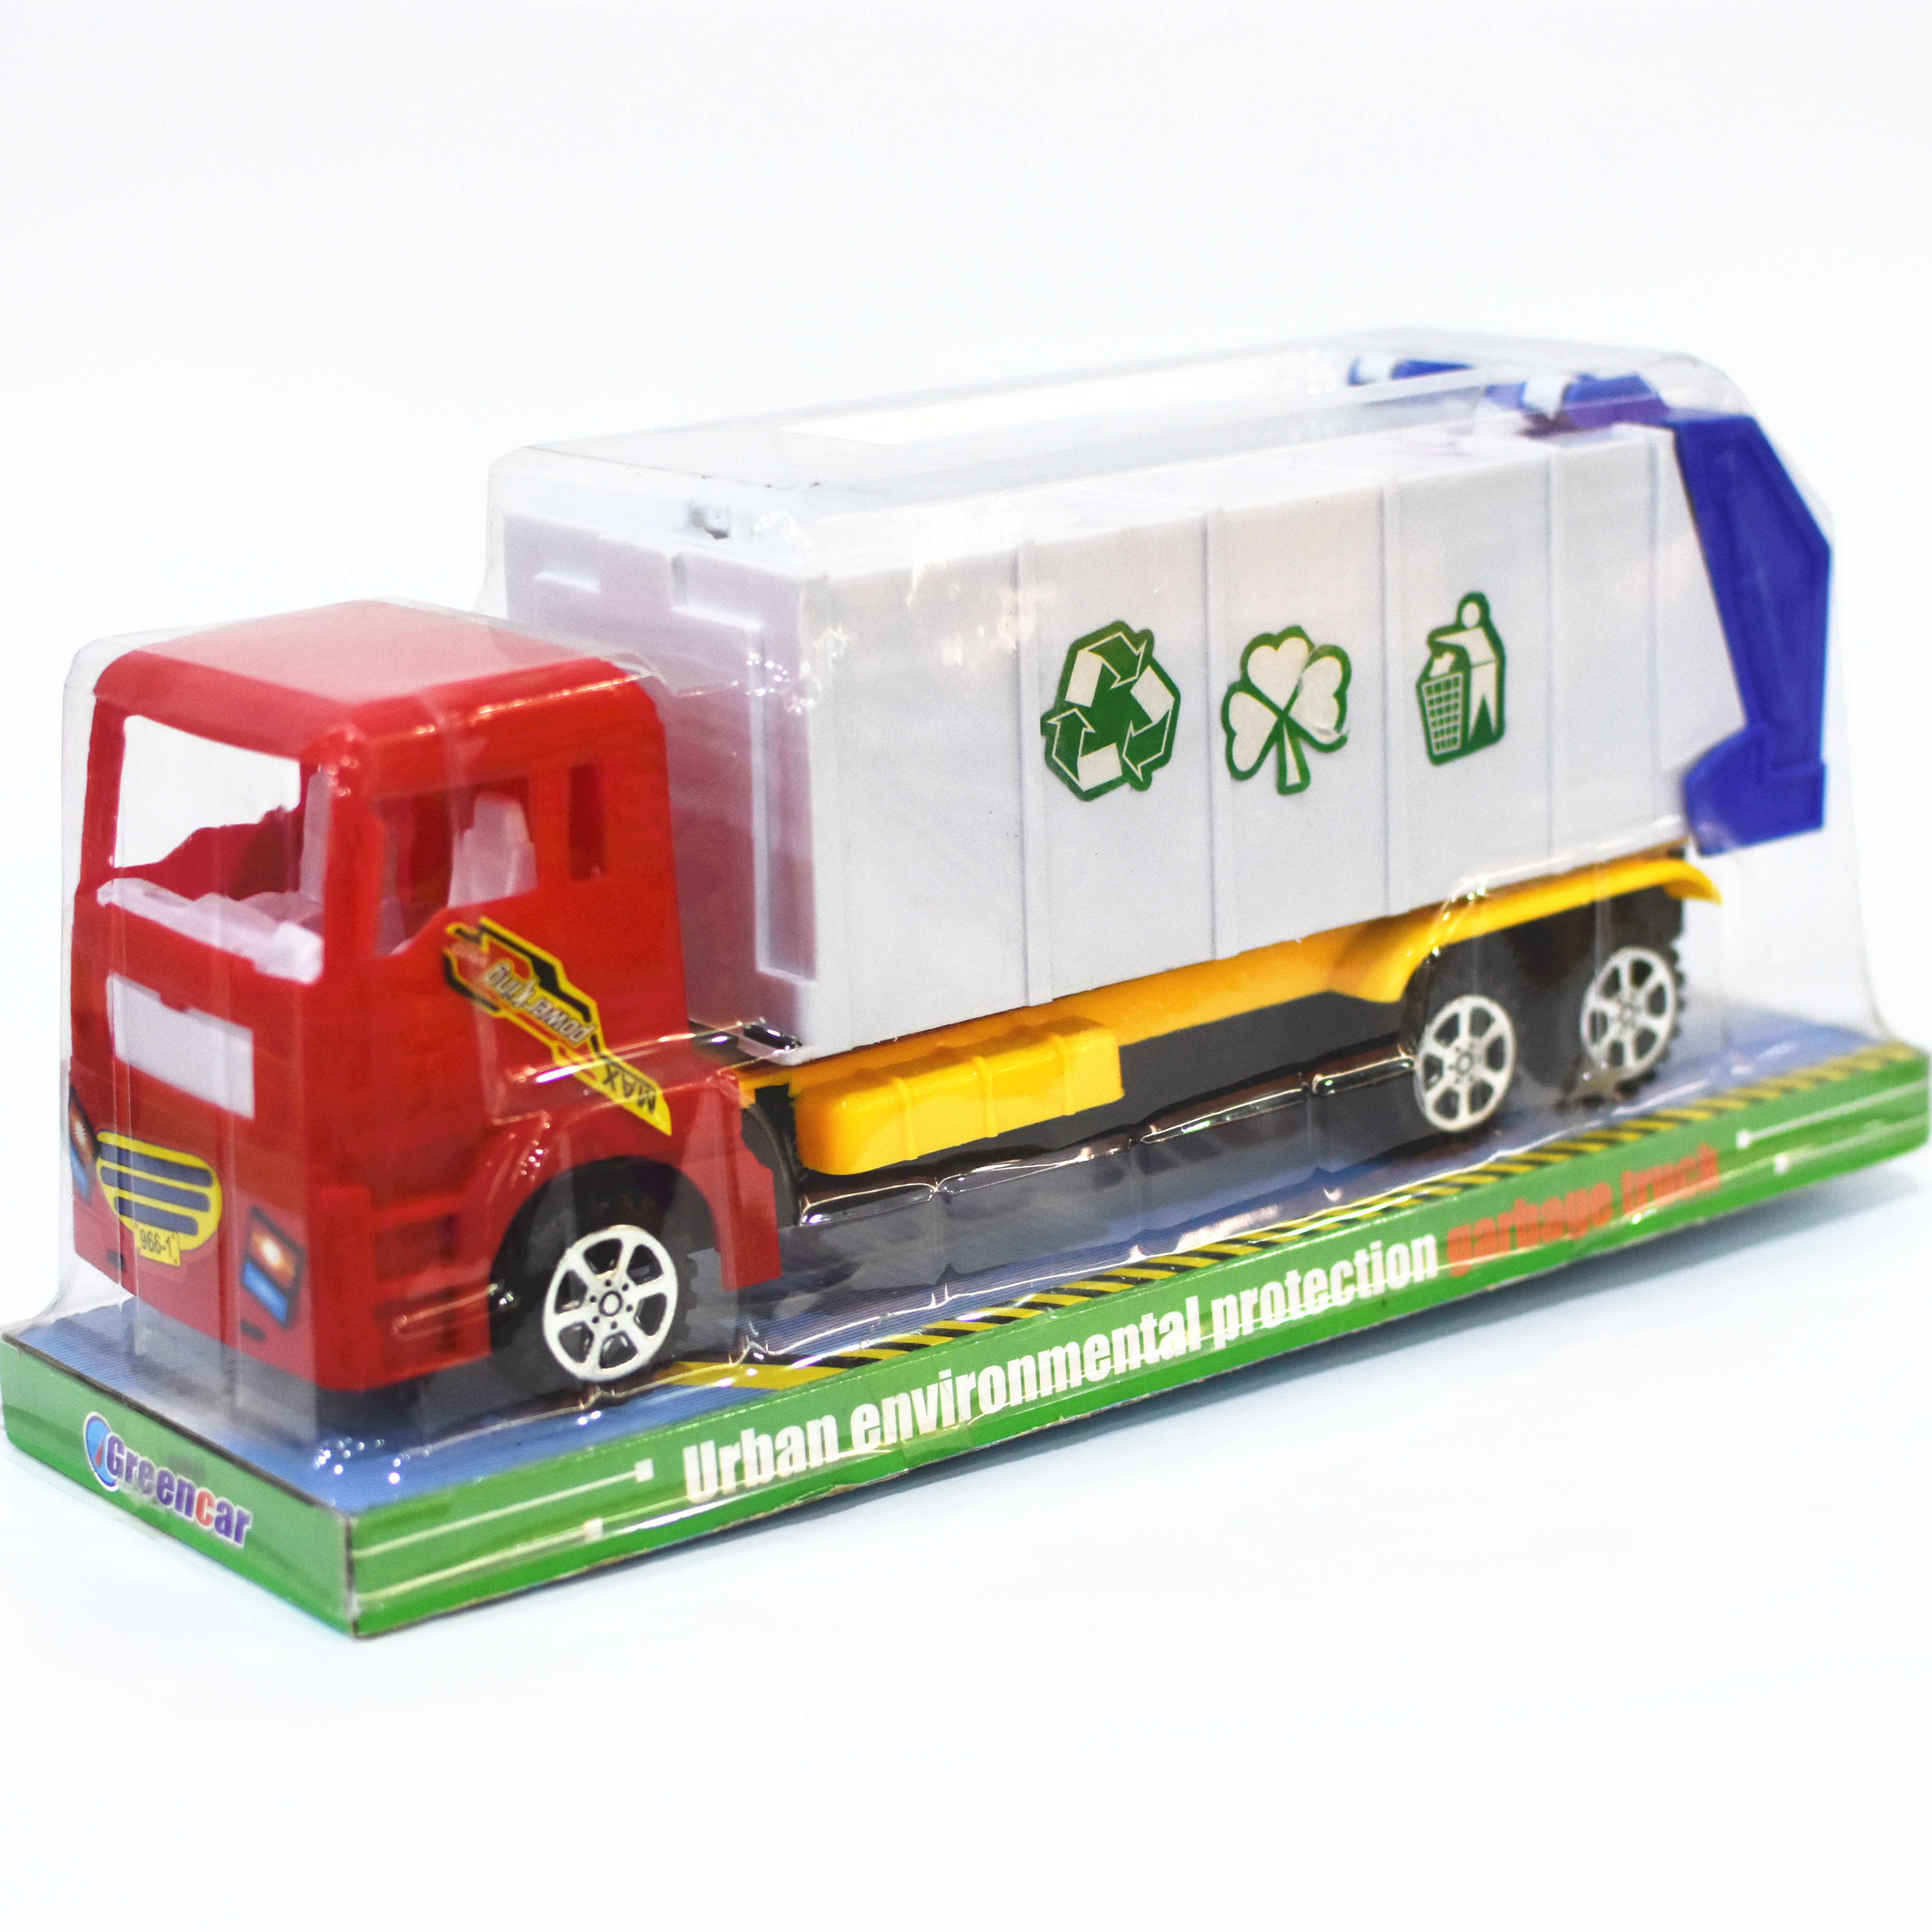 FREE WHEEL TRUCK TOY LY1815